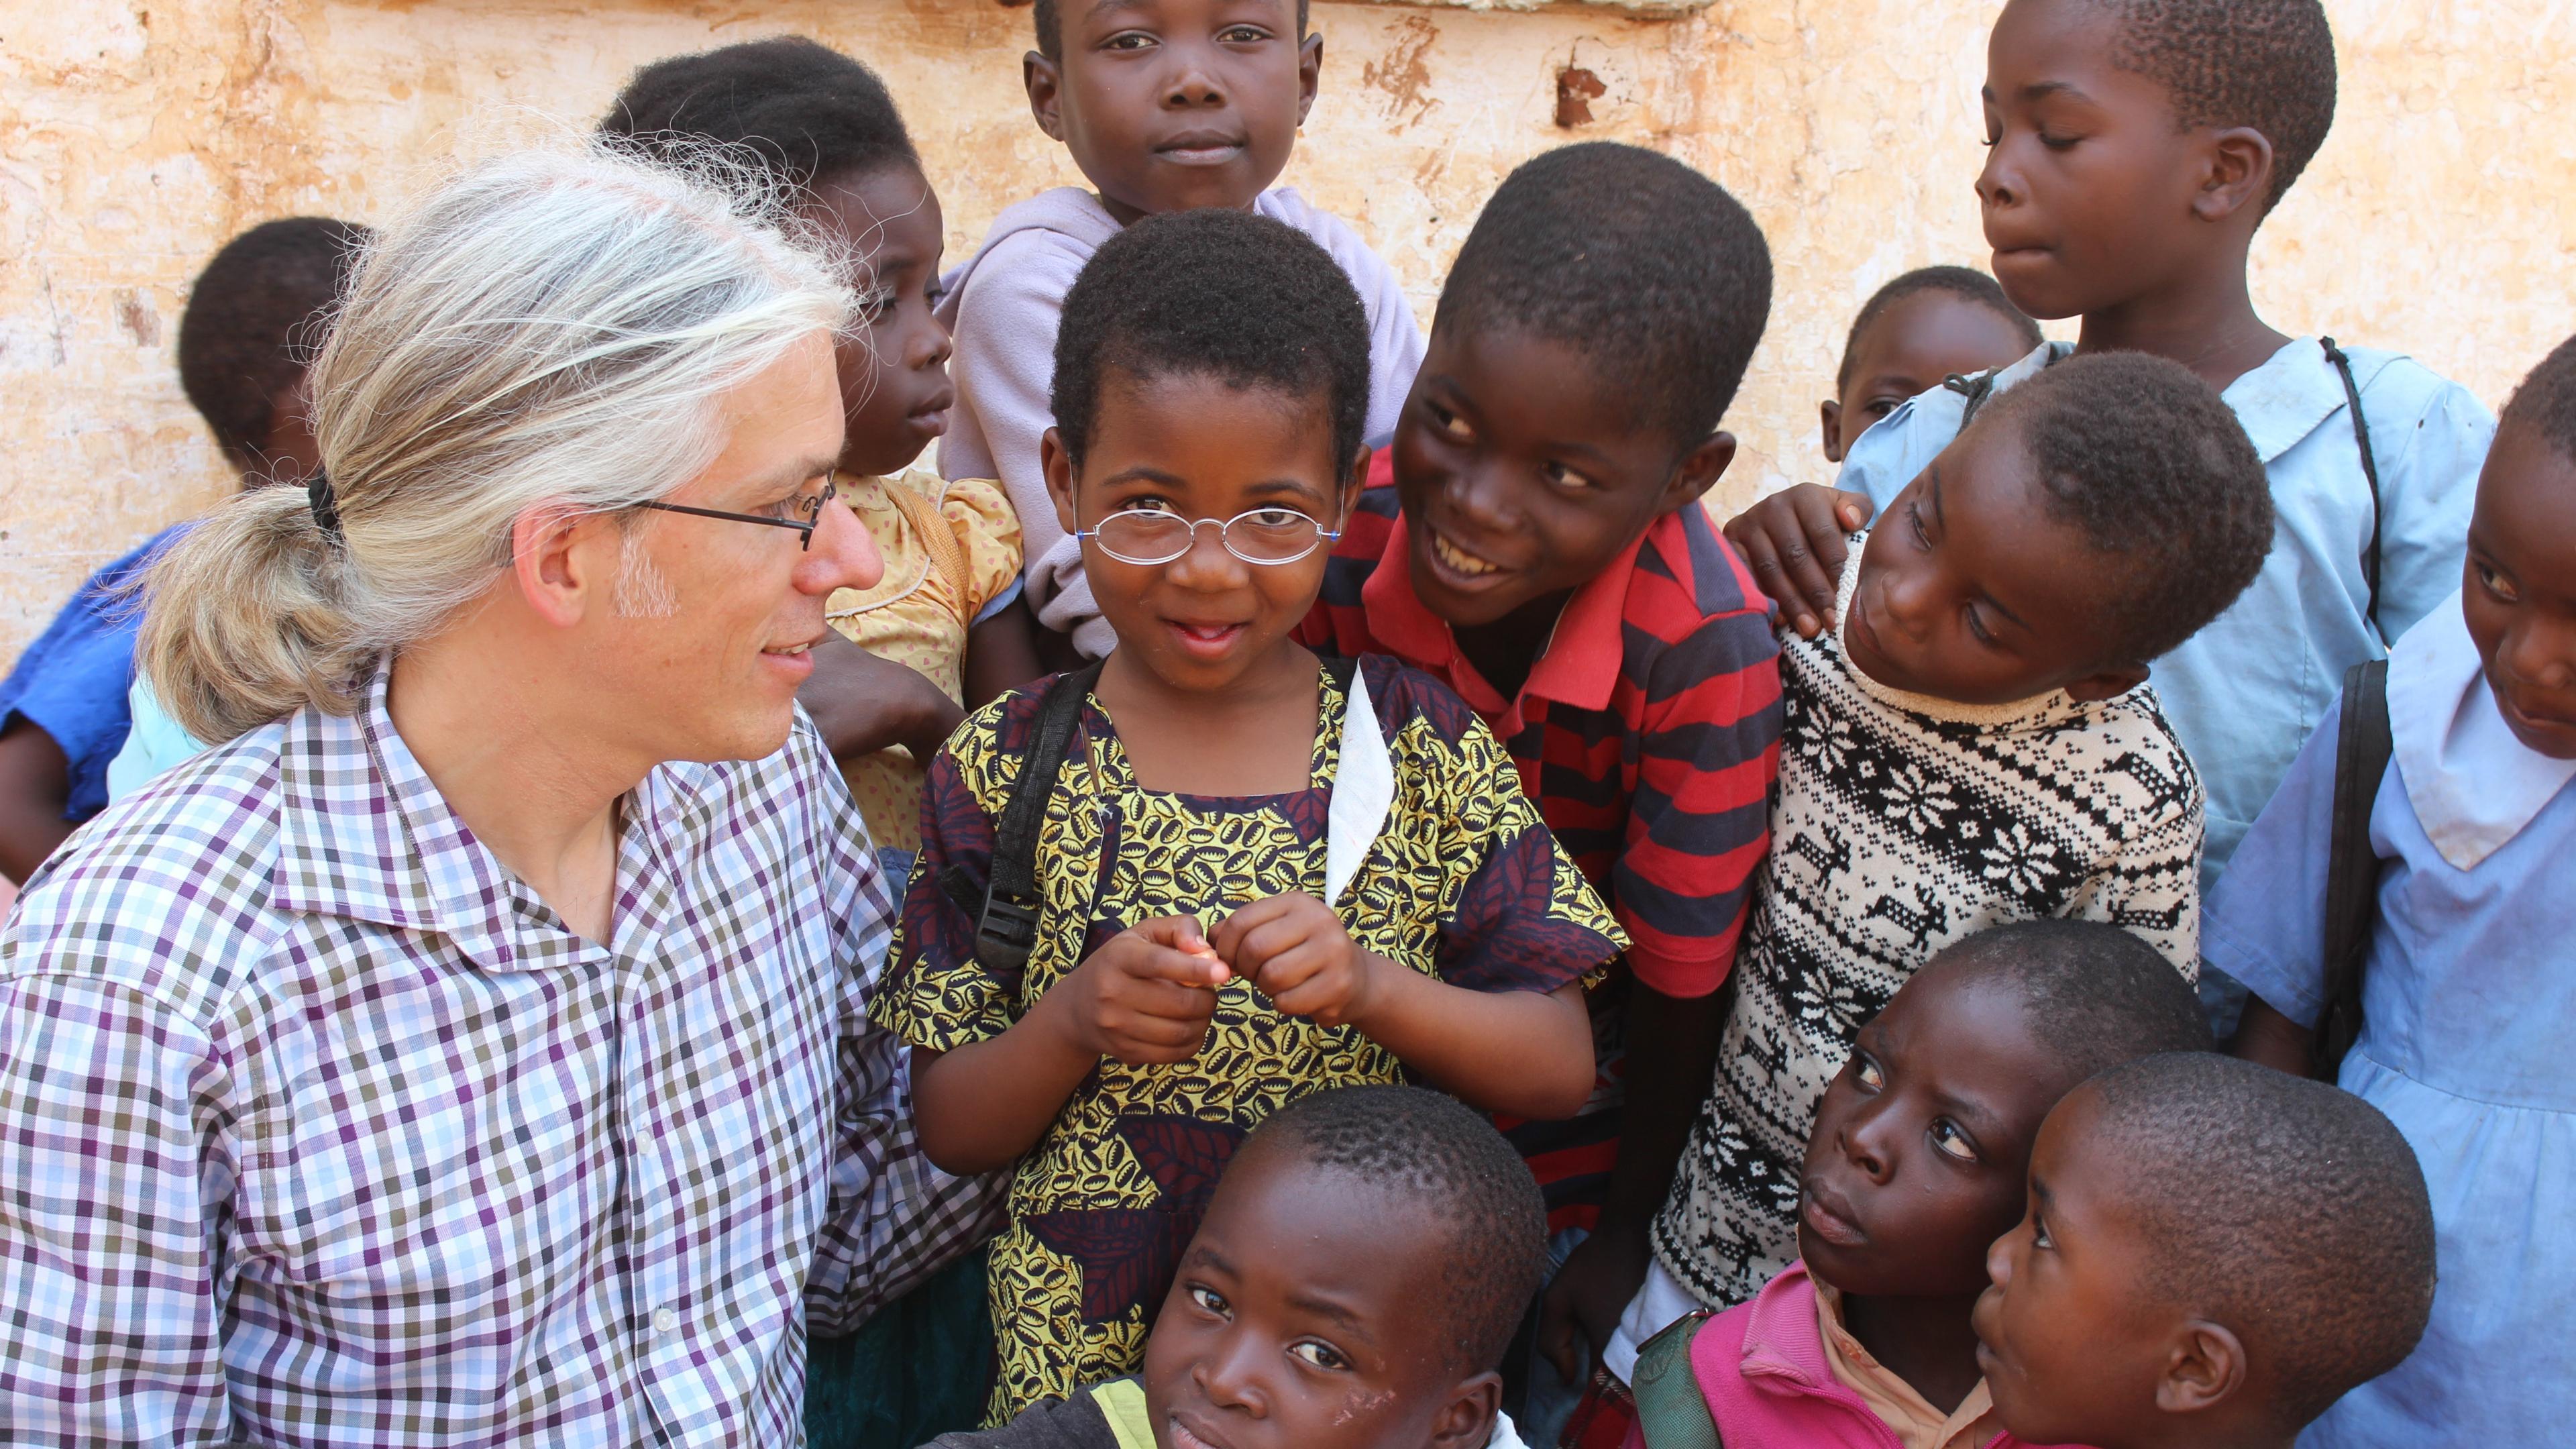 Martin Aufmuth surrounded by children in Malawi